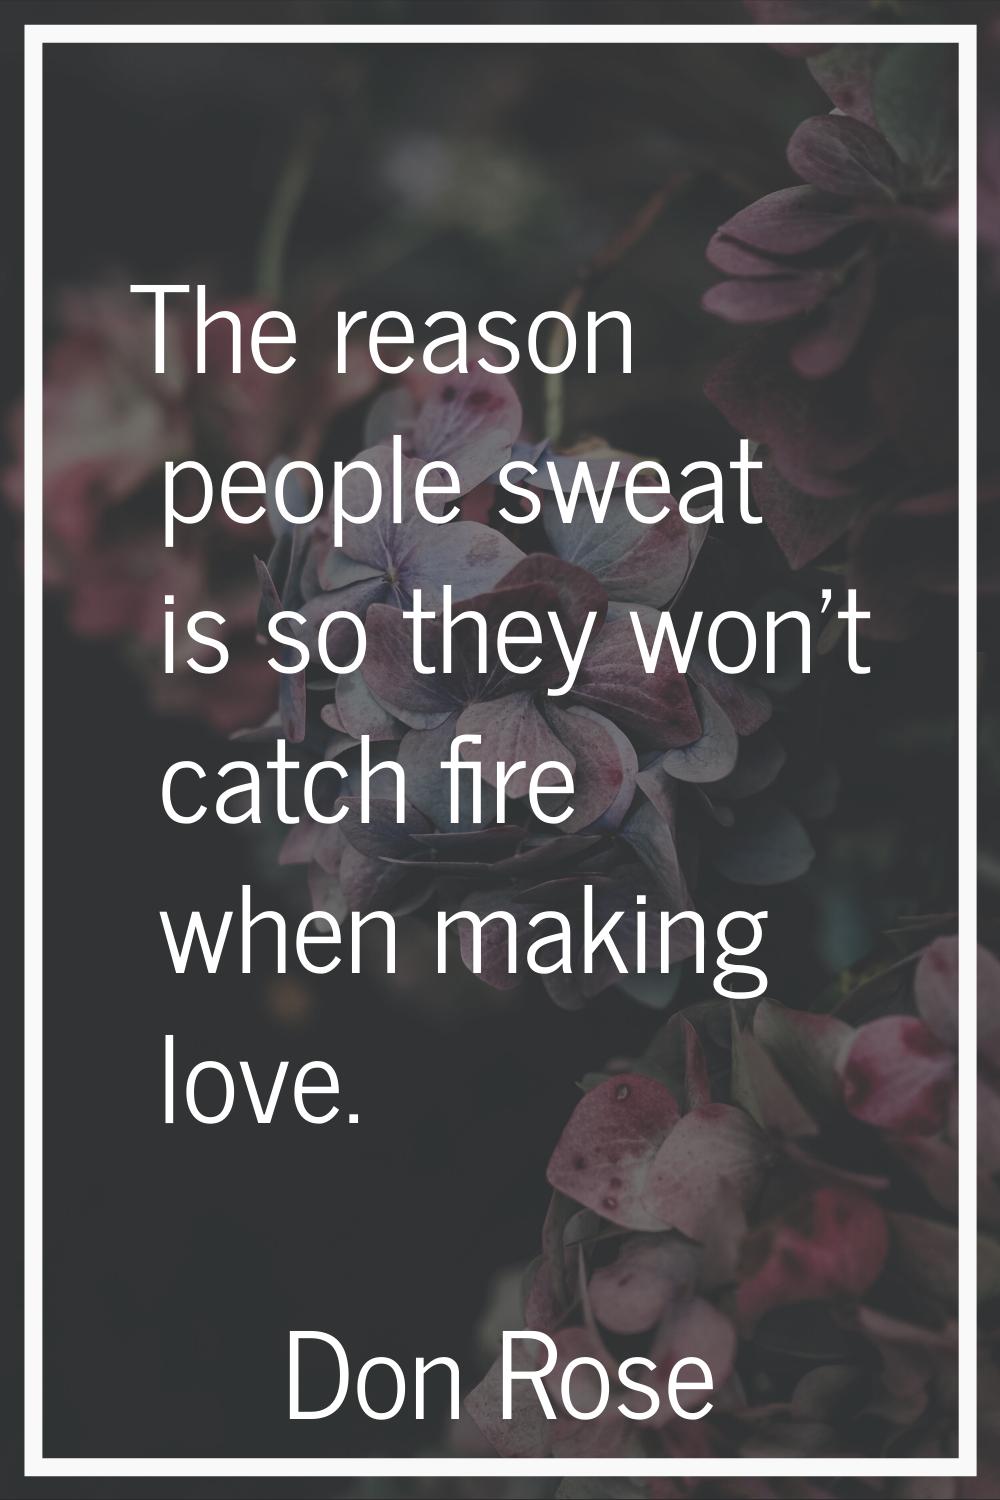 The reason people sweat is so they won't catch fire when making love.